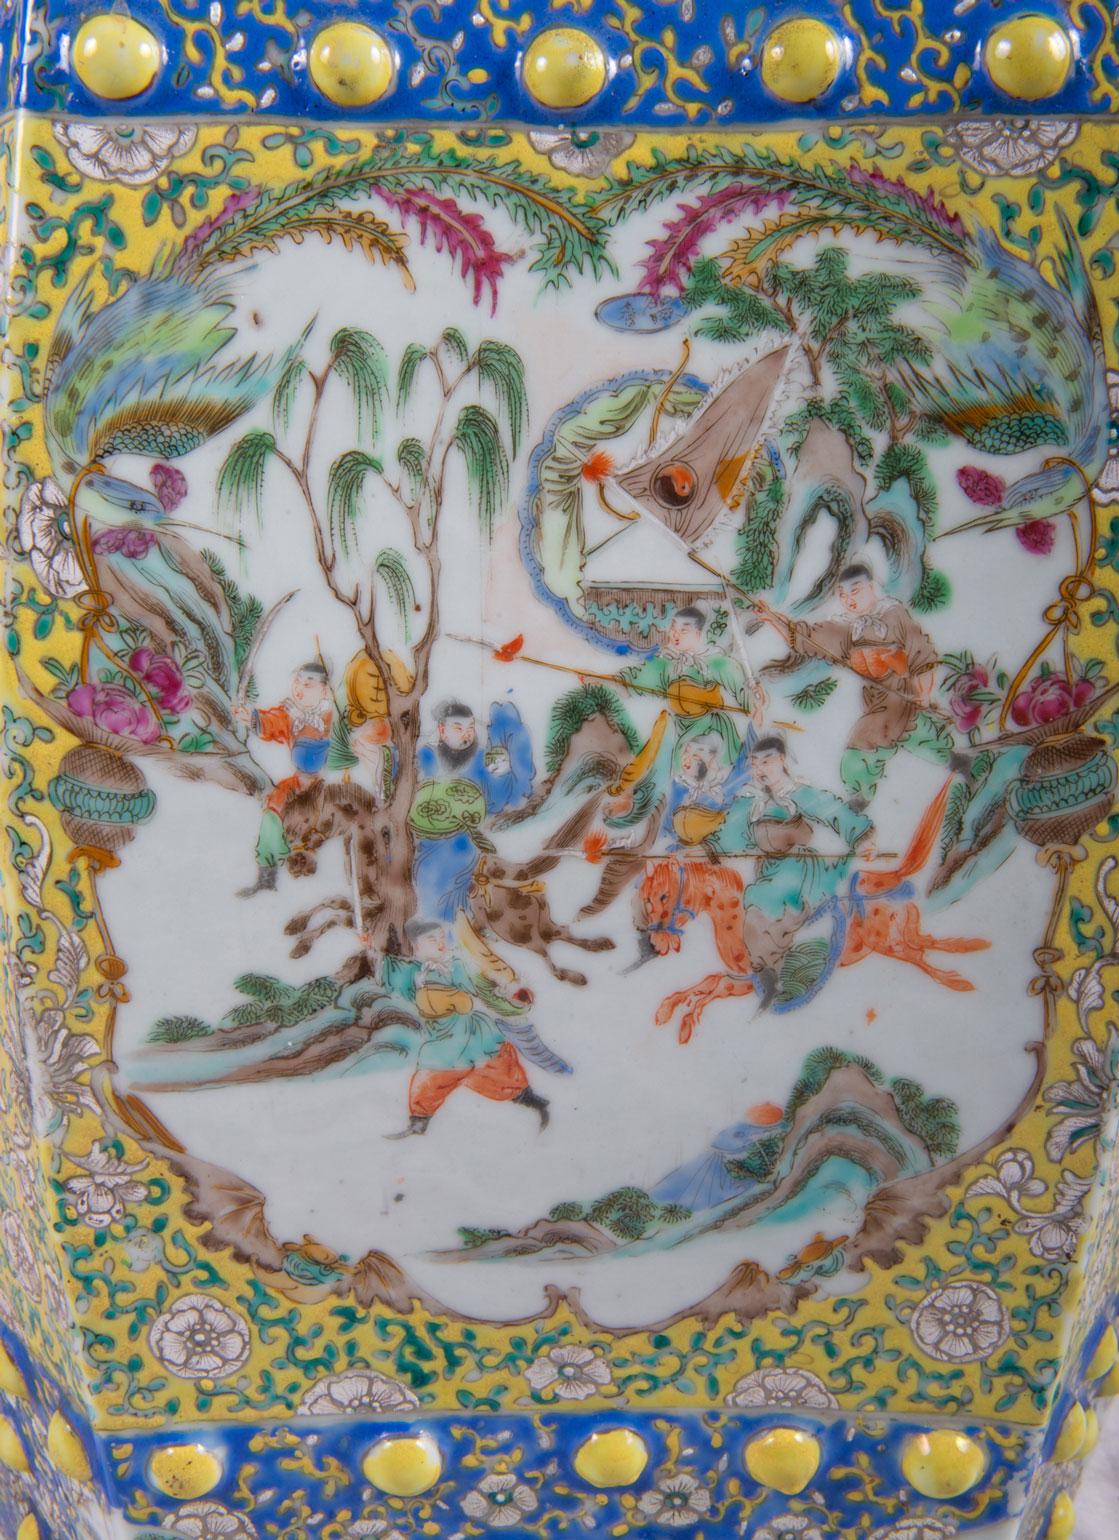 A very good quality 19th century Chinese Cantonese hexagonal porcelain garden seat have a blue and yellow ground, pierced decoration to the seat and sides, scrolling foliate patterns with inset panels depicting warriors on horse back, a courtier